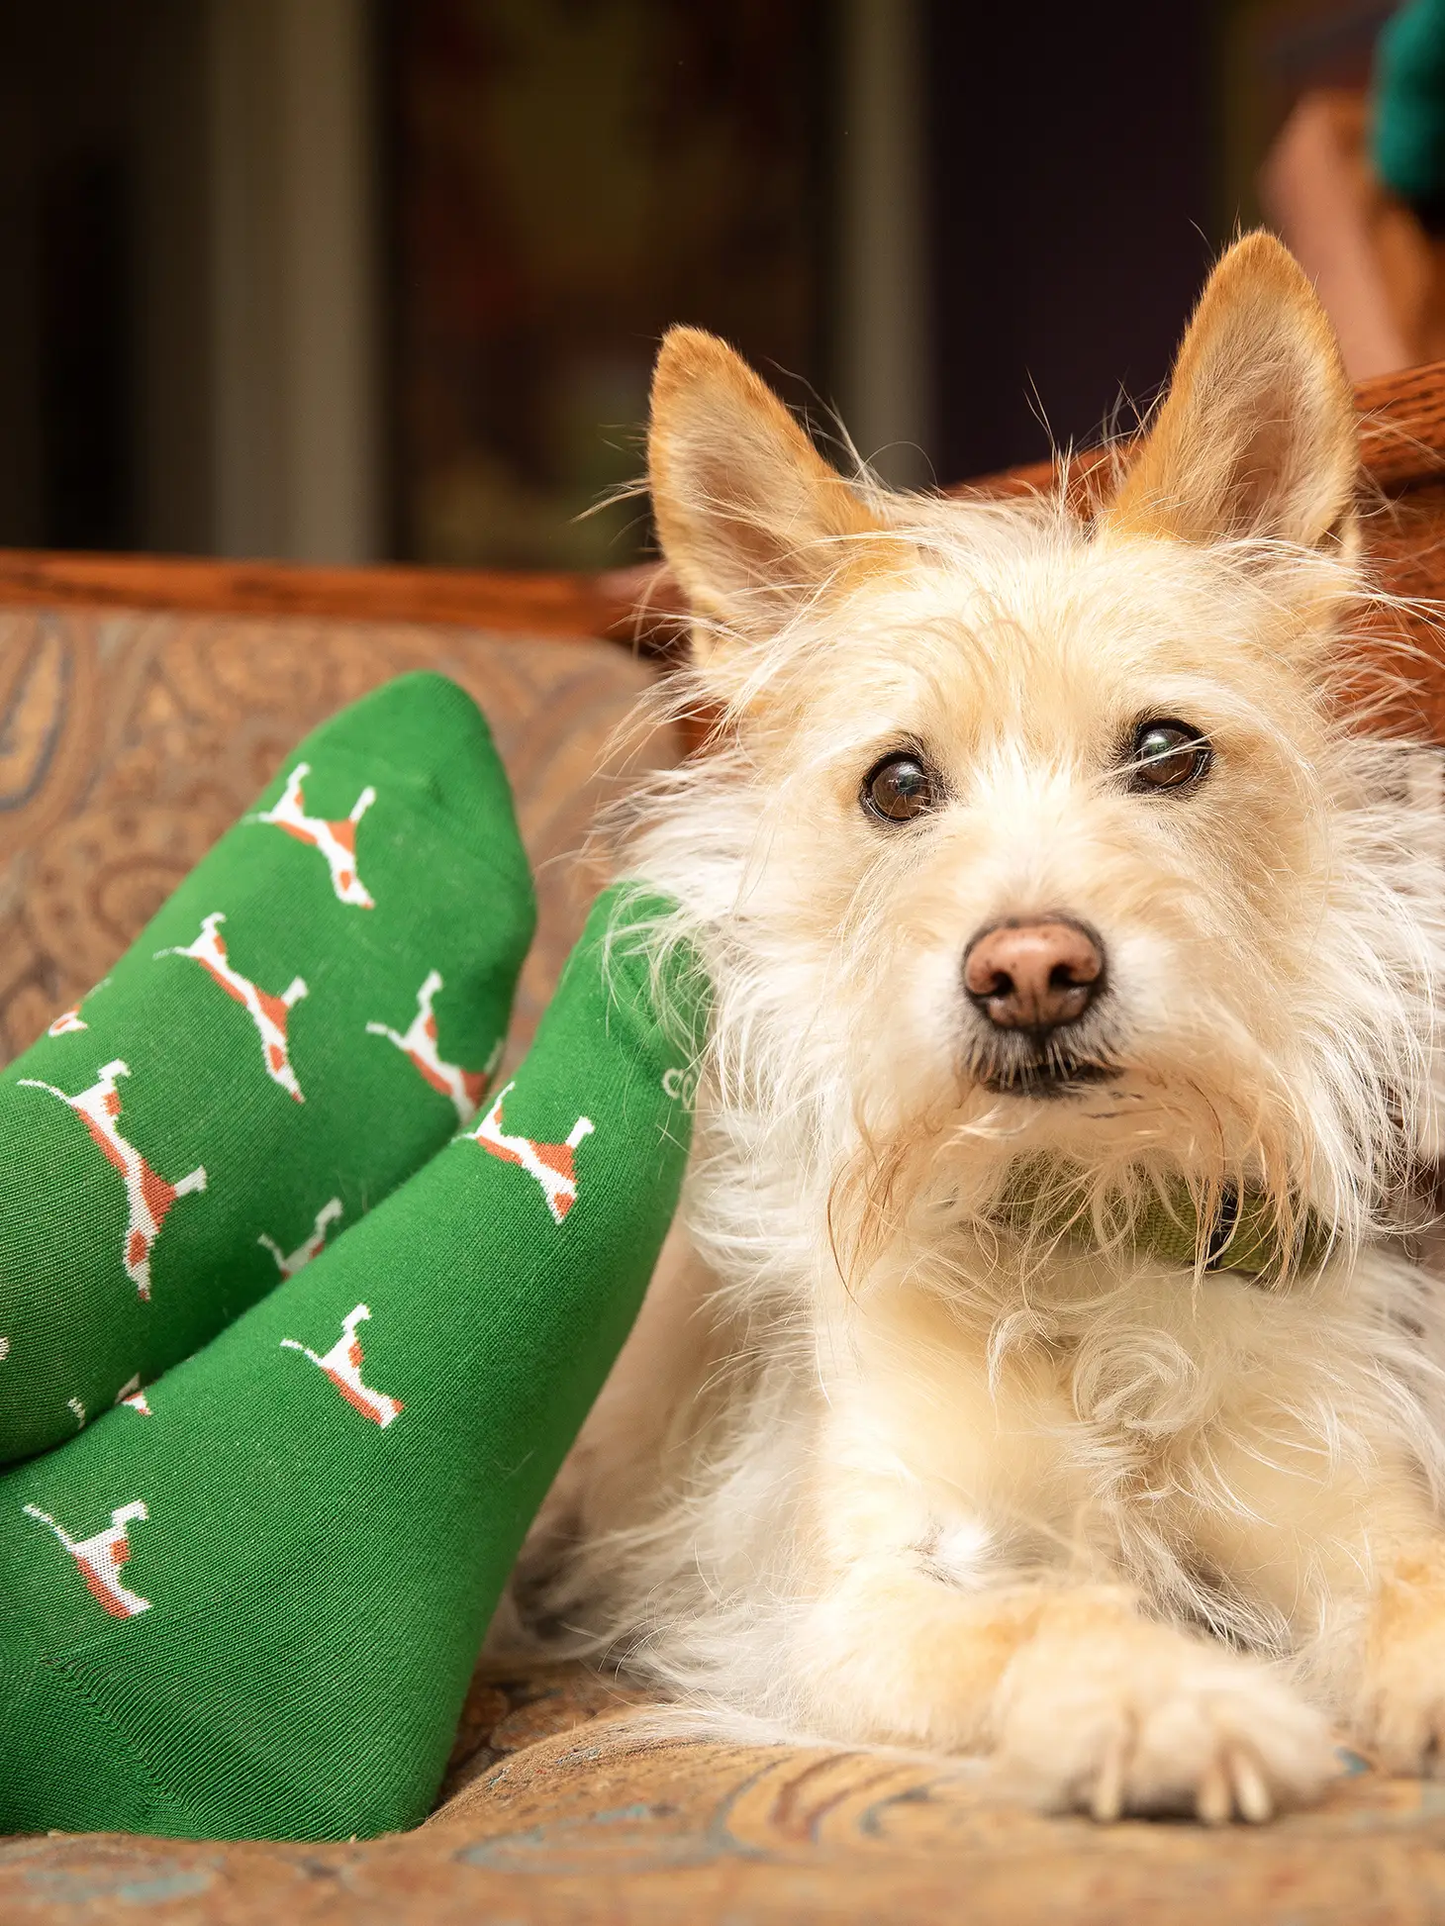 Socks That Save Dogs